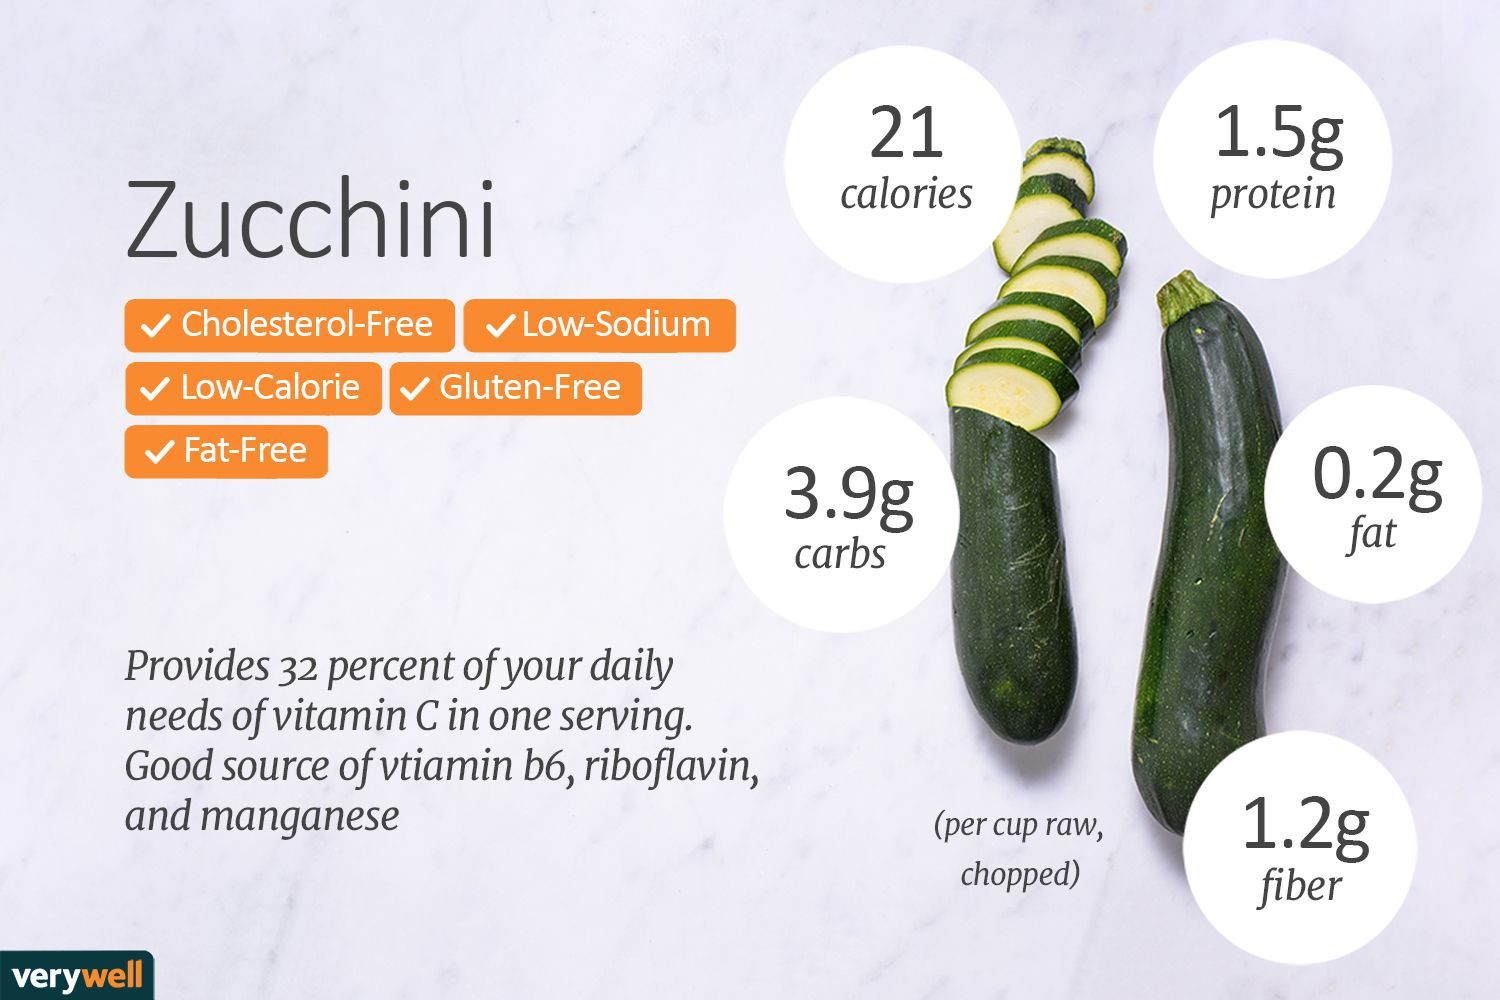 Summer Squash Nutrition
 Summer Squash and Zucchini Nutrition Facts Calories